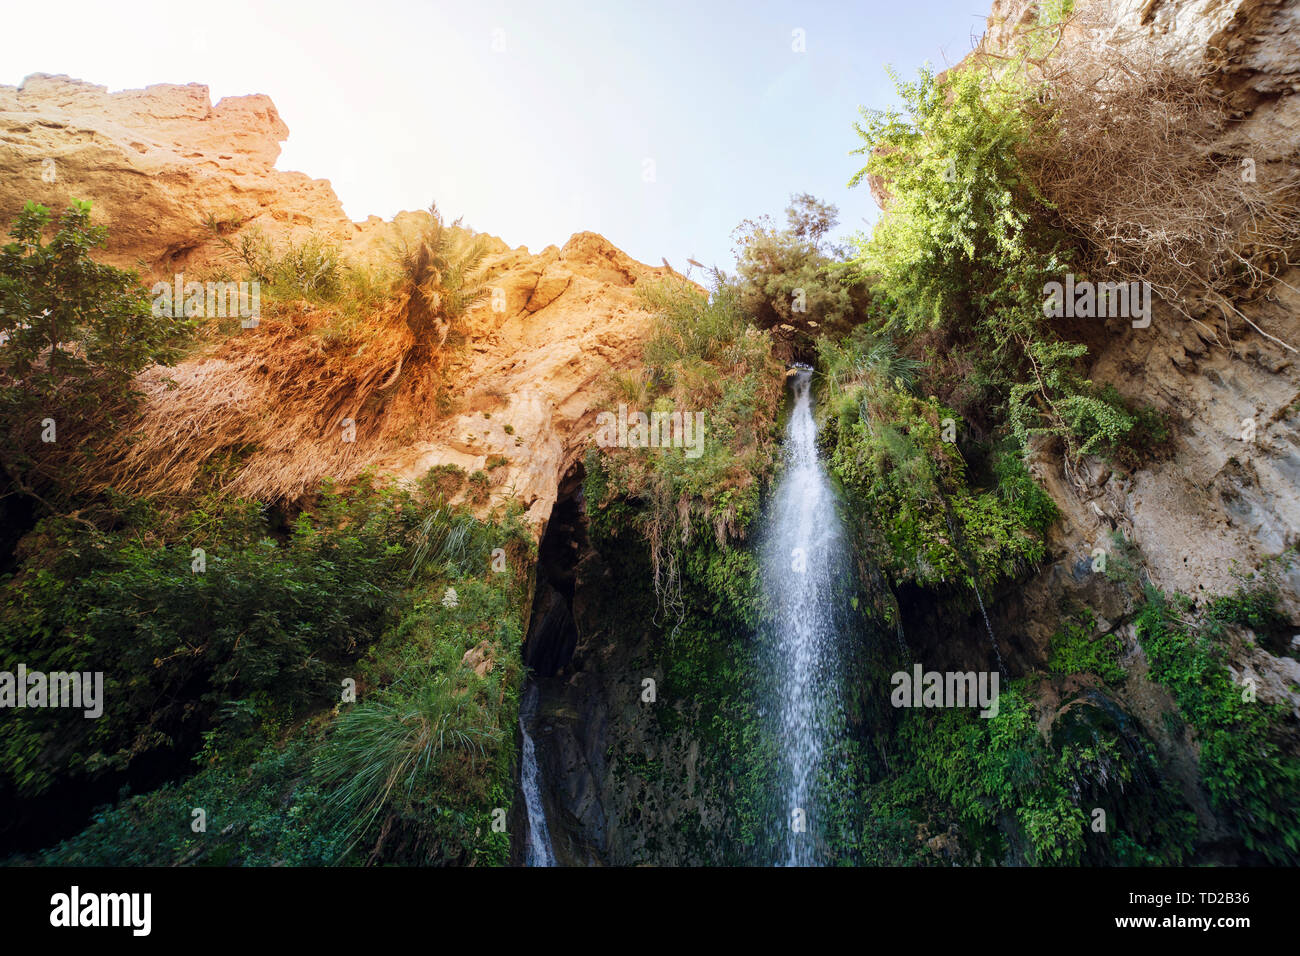 Close uup of Great Falls Shulamit falling from the top of a mountain with green trees and bushes. Ein Gedi - Nature Reserve and National Park, Israel Stock Photo